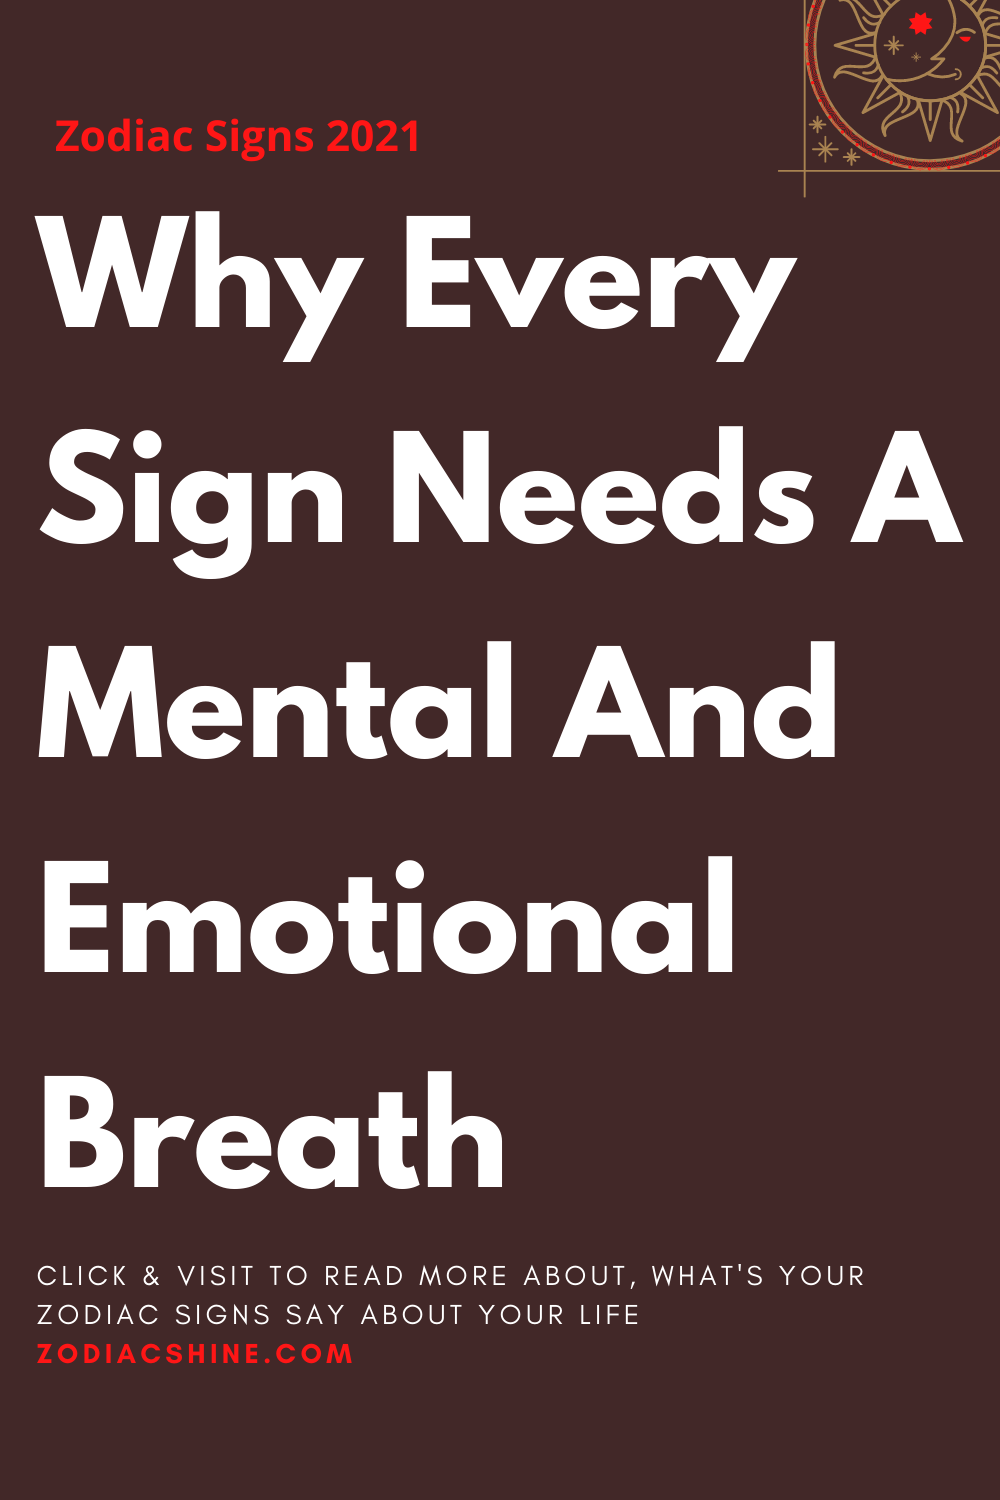 Why Every Sign Needs A Mental And Emotional Breath